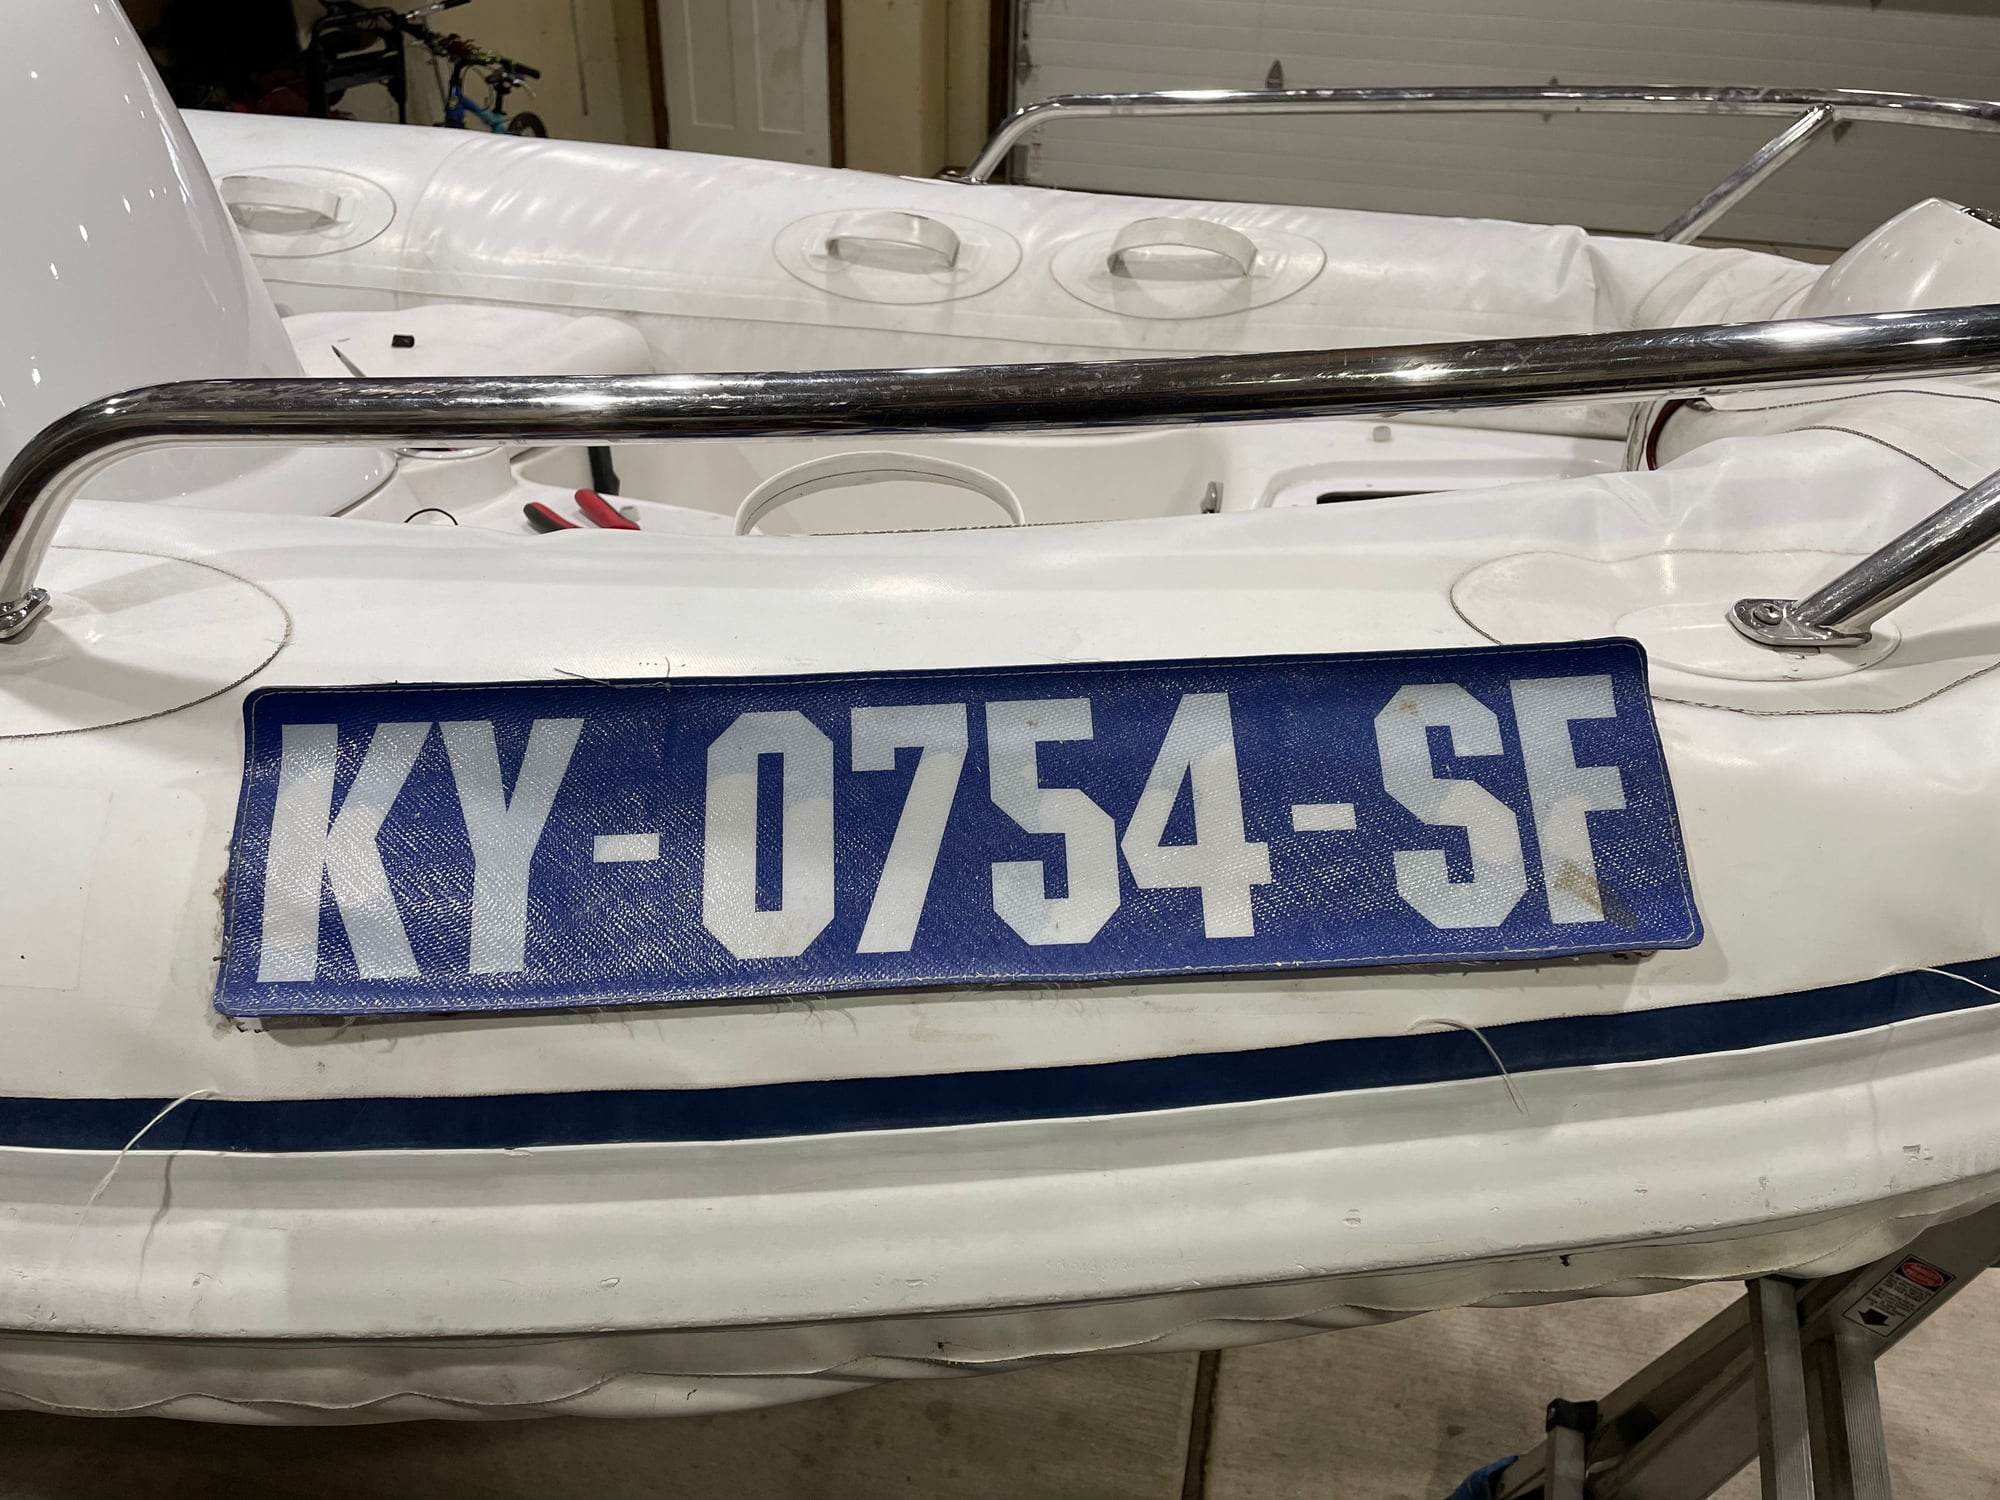 Where to put ruler sticker? - The Hull Truth - Boating and Fishing